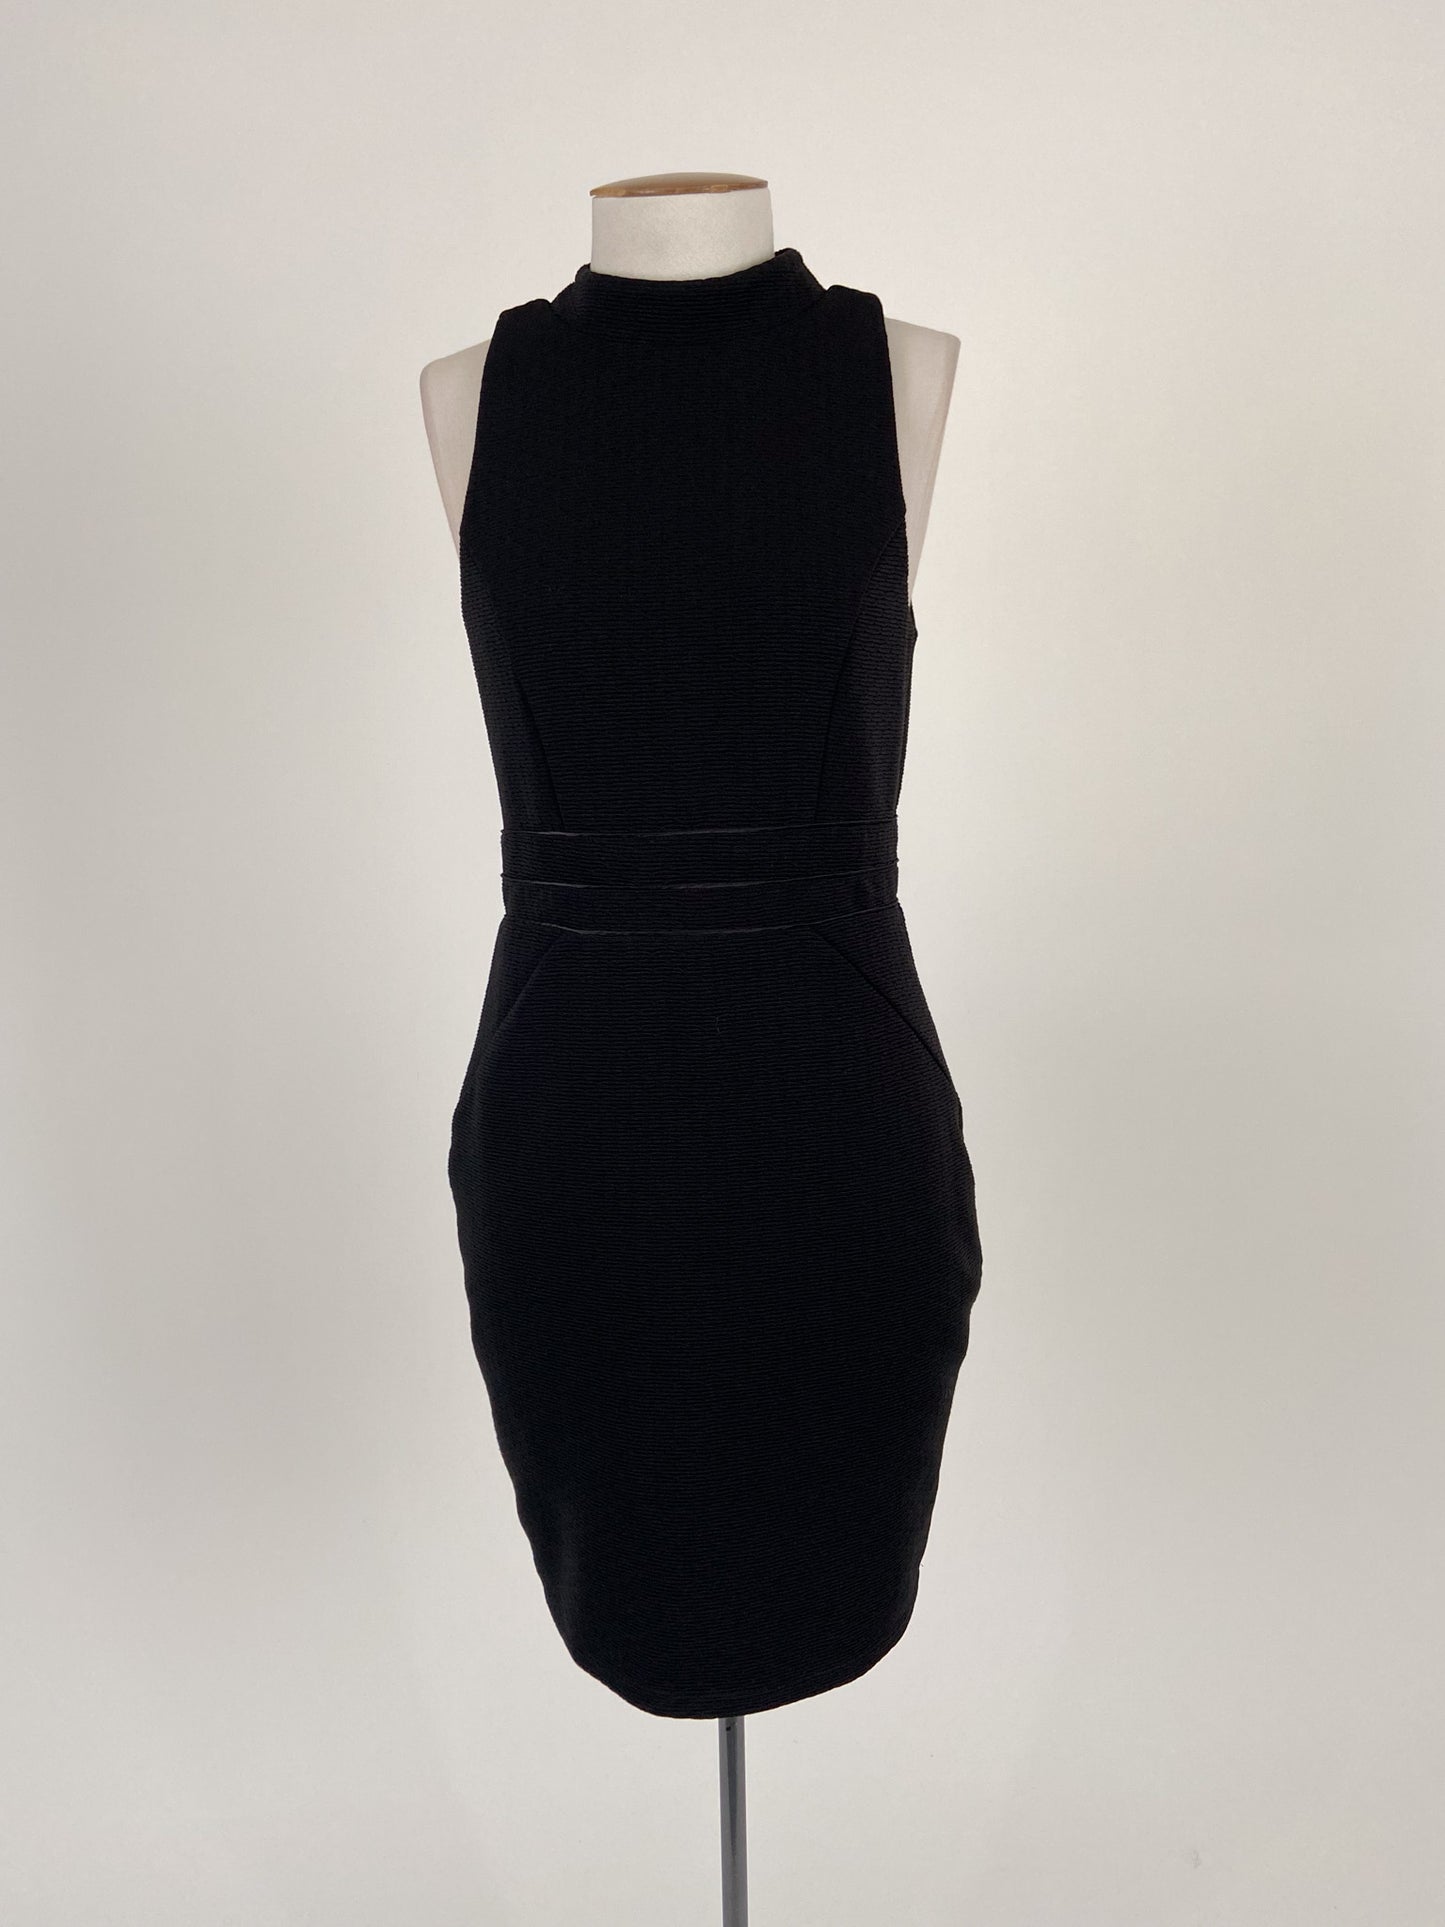 Forever New | Black Cocktail/Workwear Dress | Size 10